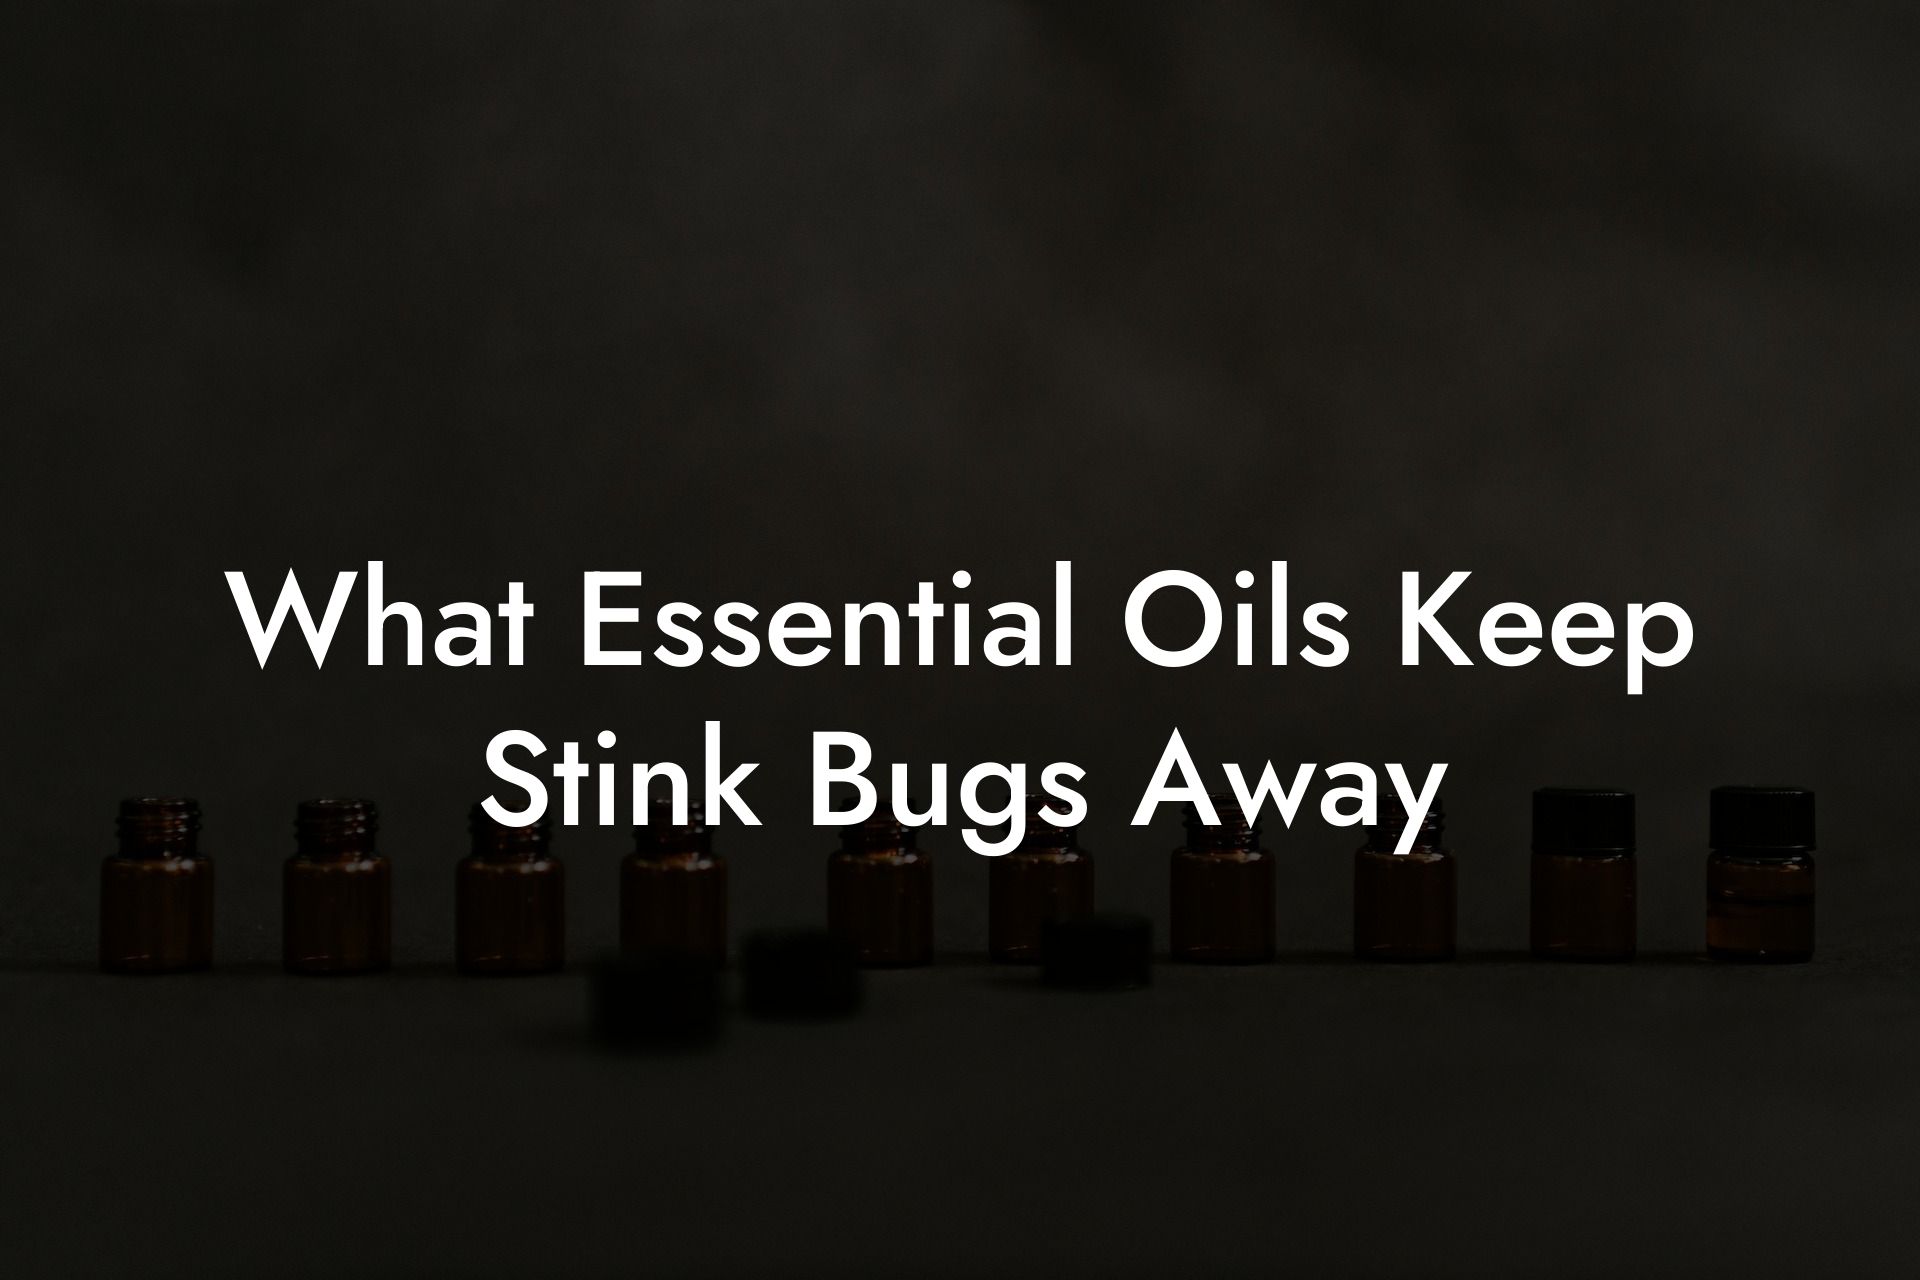 What Essential Oils Keep Stink Bugs Away